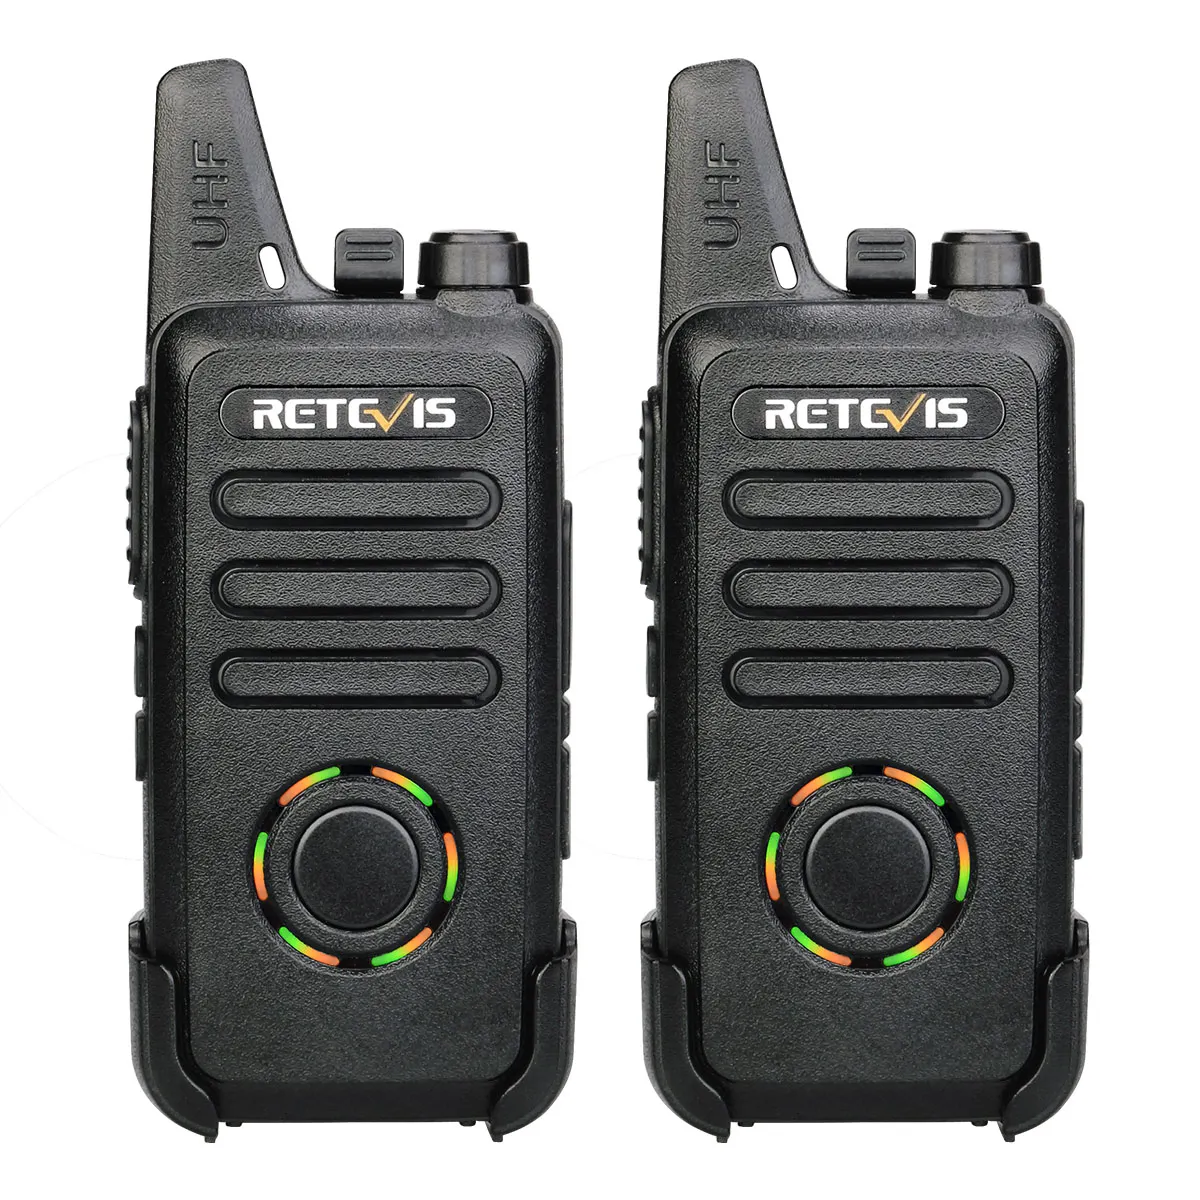 

Long Range Cheap walkie talkie Retevis RT22S FRS License-free 22CH 2W Two Way Radio Channel Display Signal Indicator transceiver